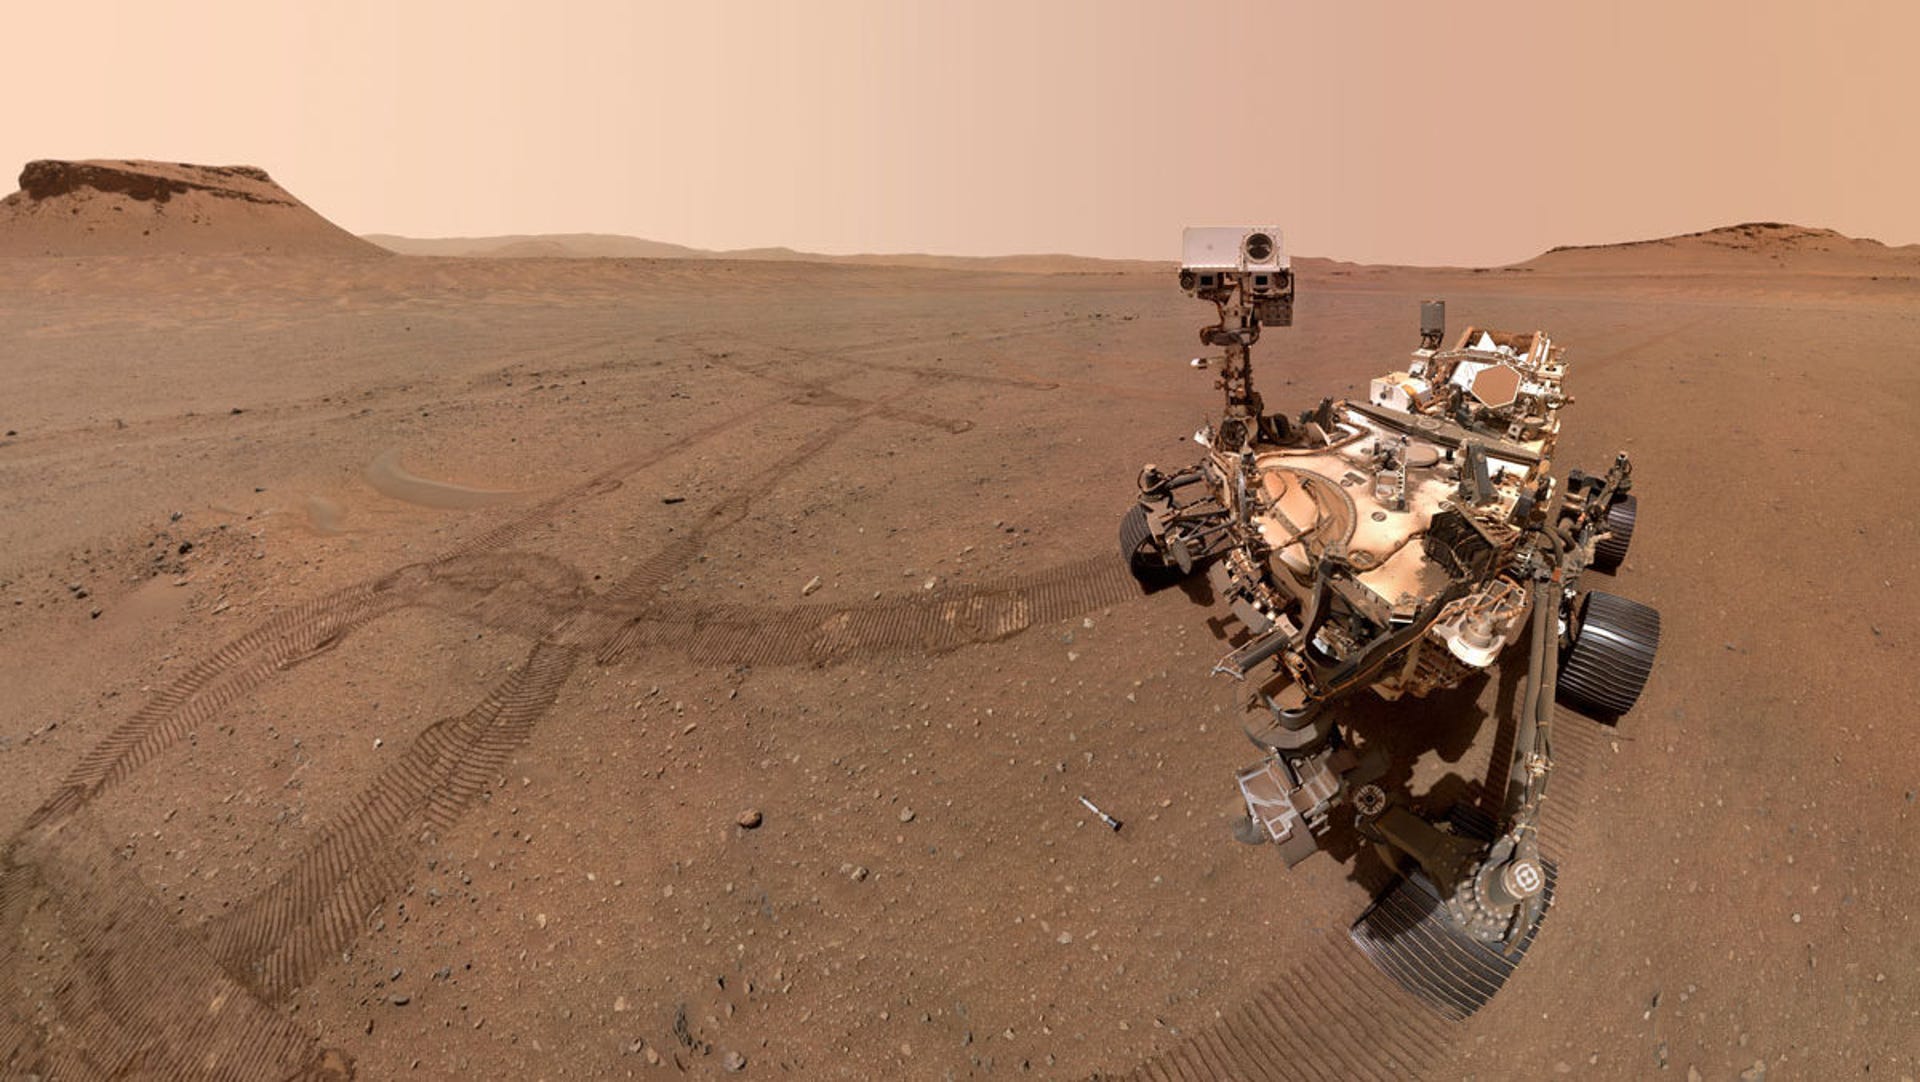 NASA Perseverance rover poses in a full-body selfie on a brown, pebbly Mars landscape. Horizon line in the distance, wheel tracks on the ground, sample tubes on the surface, including one right in front of the car-sized wheeled robot.